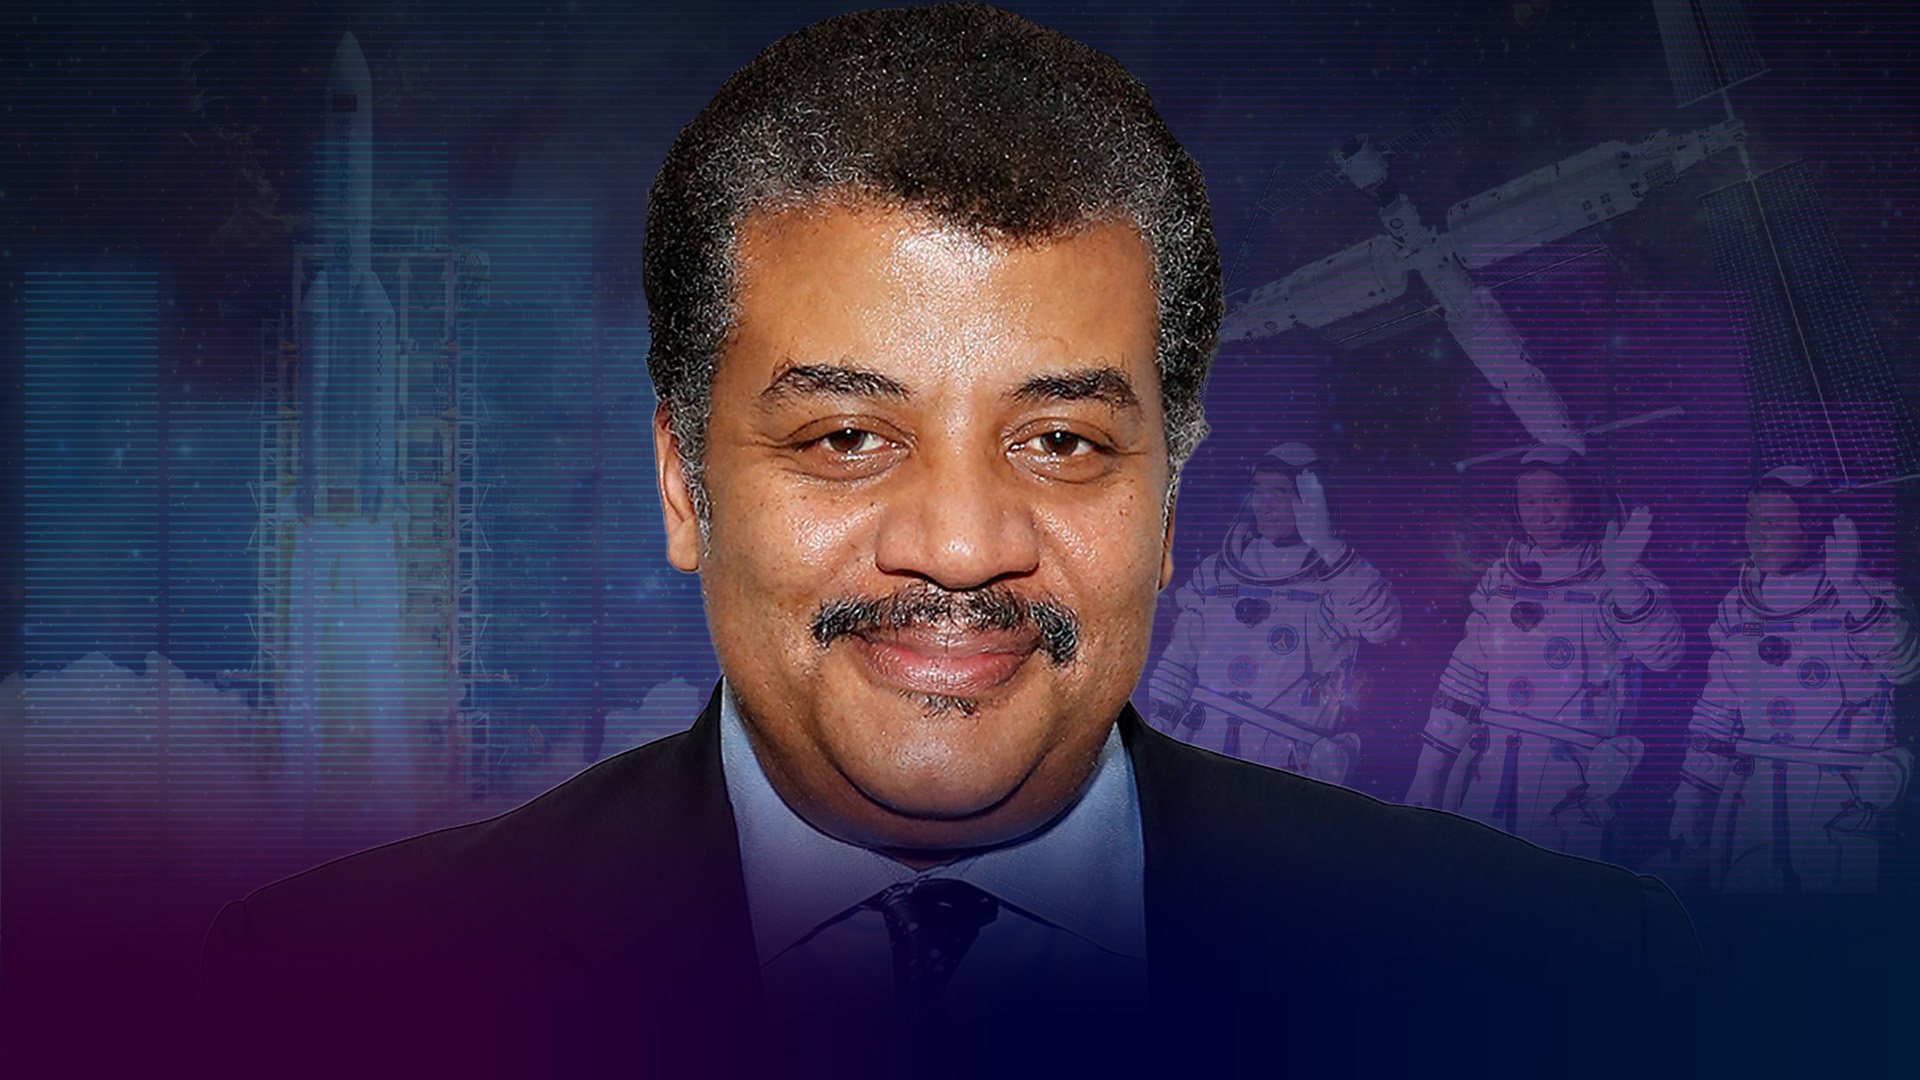 Neil deGrasse Tyson. The astrophysicist thinks China and the US are ‘frenemies’ in space, and says we need to acknowledge that we’re all alive against ‘stupendous odds’. Photo: SCMP